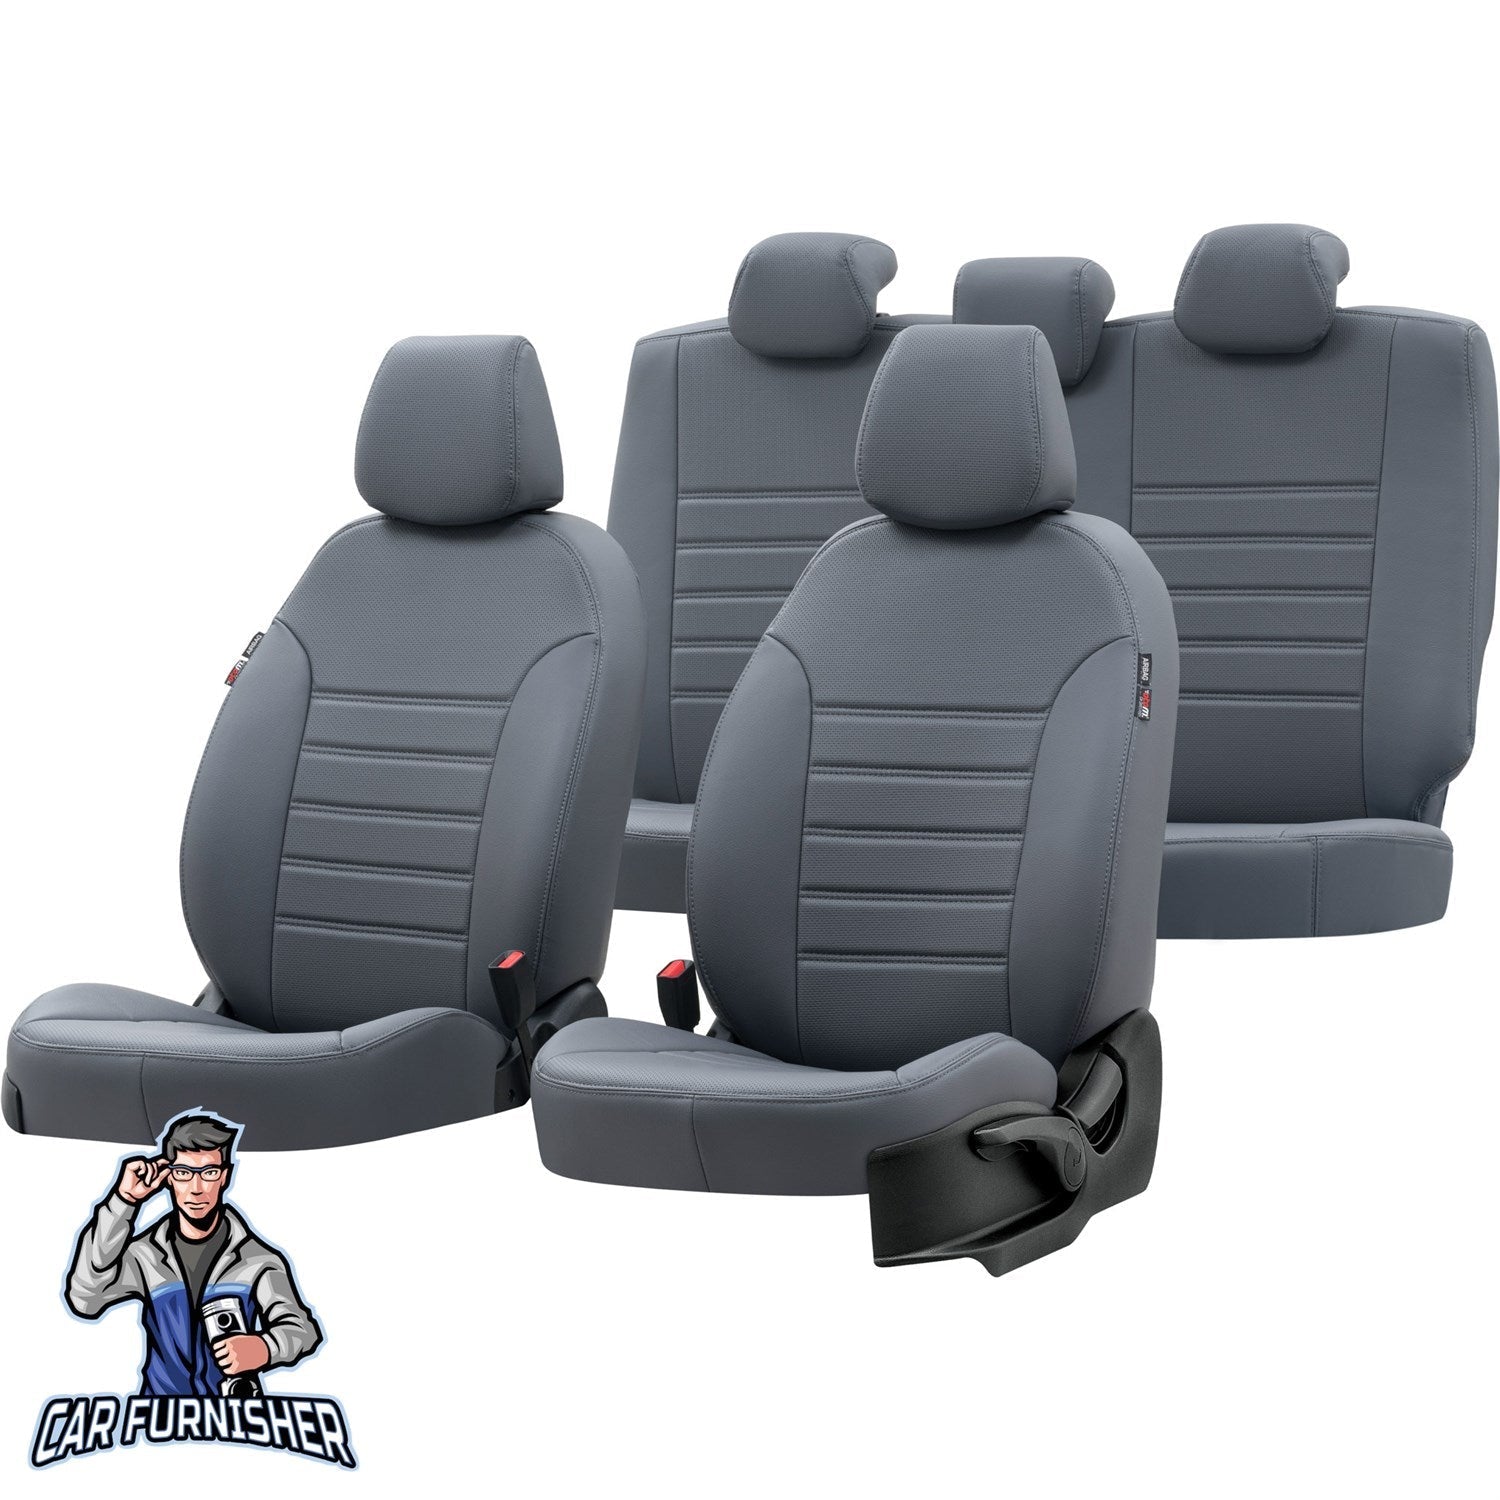 Peugeot Boxer Seat Covers New York Leather Design Smoked Leather